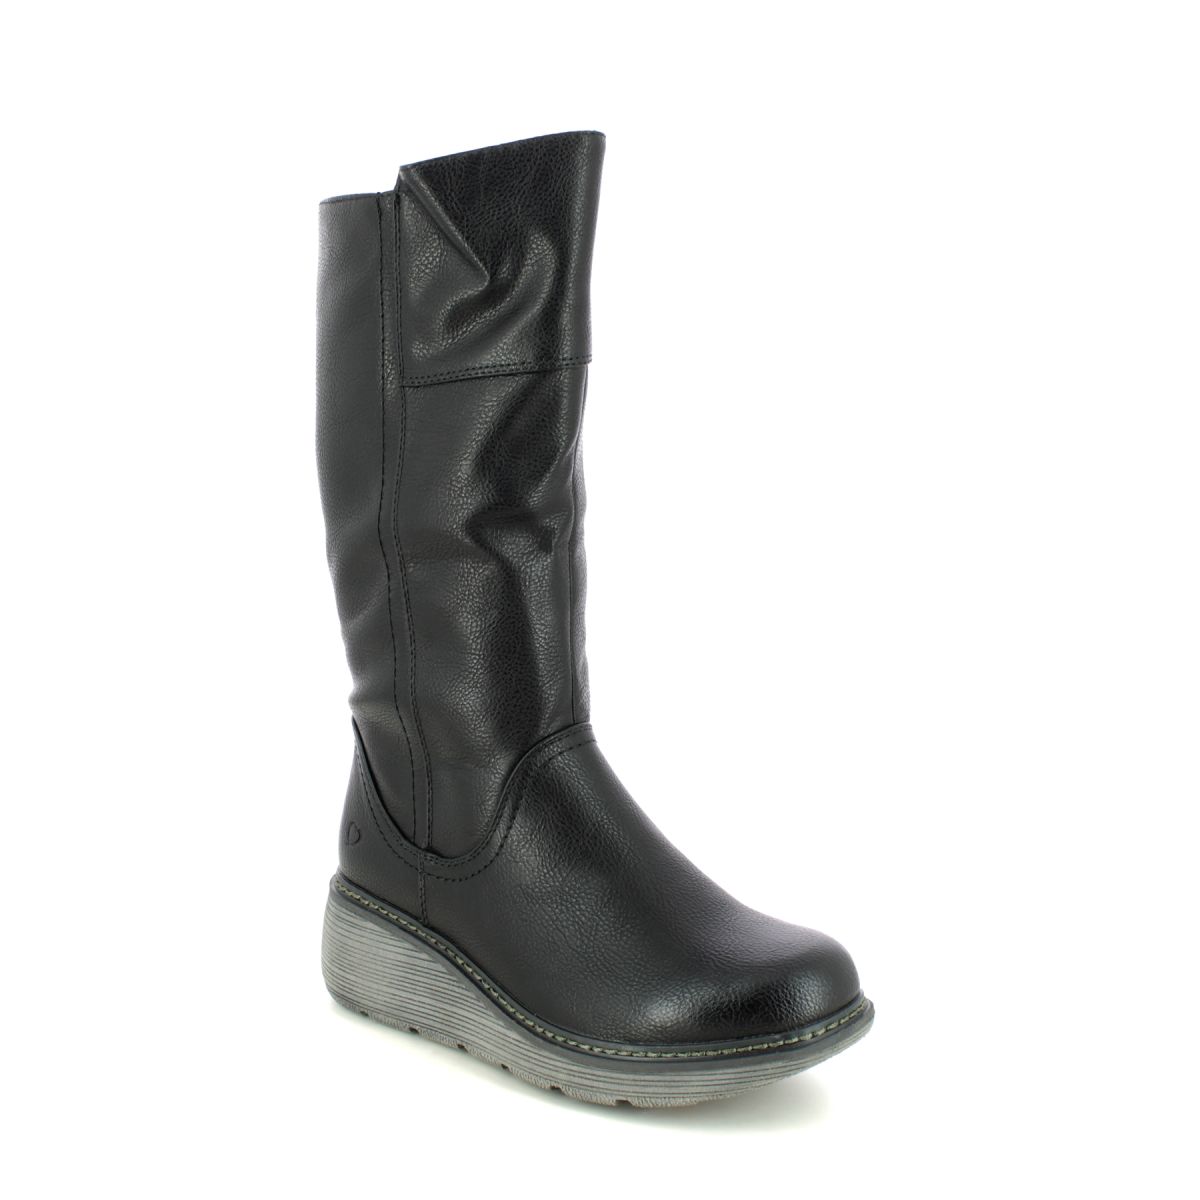 Heavenly Feet Lombardy Wedge Black Womens Mid Calf Boots 3005-34